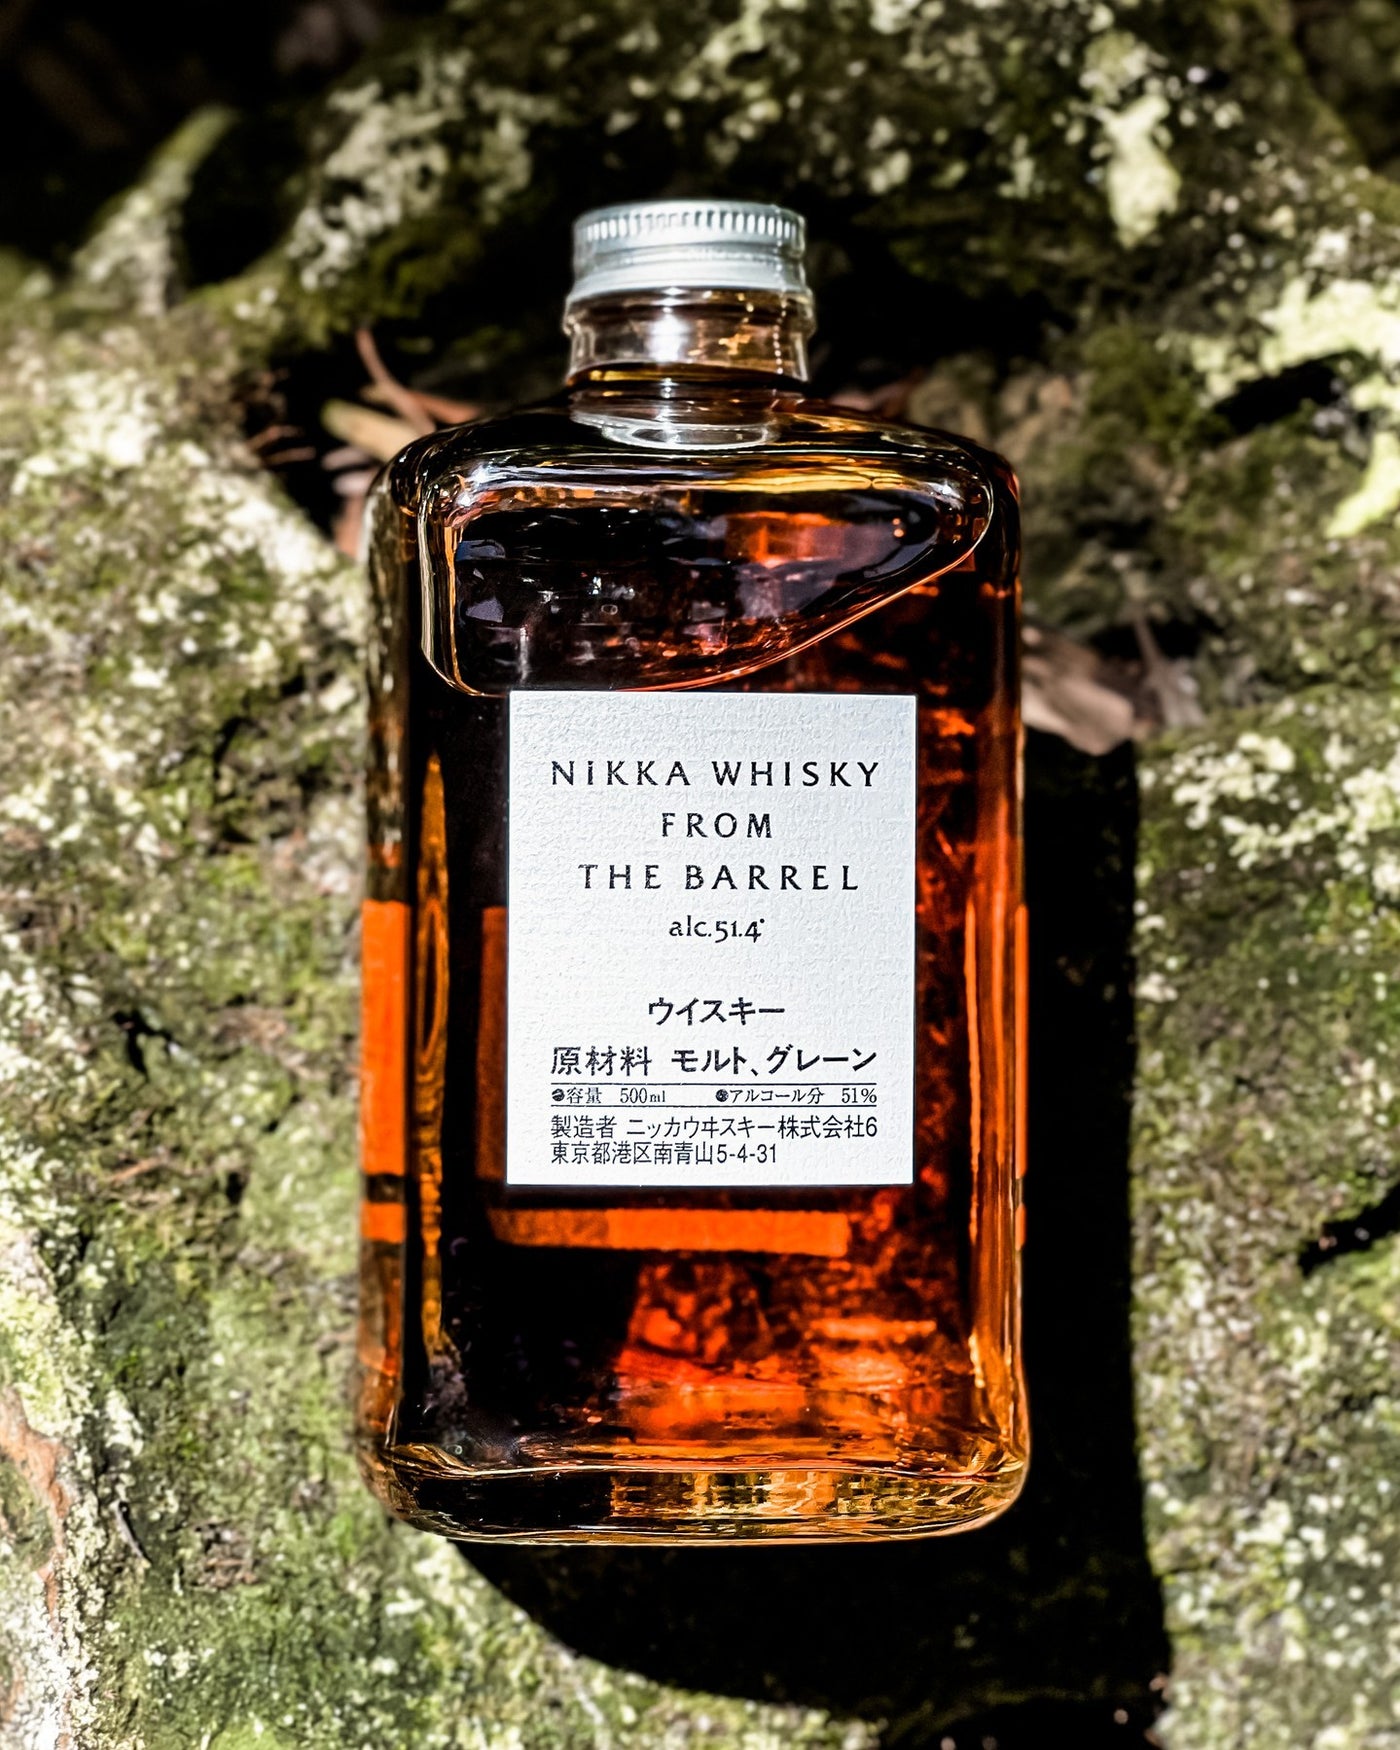 Nikka Whisky From the Barrel Review - Blended Japanese Whisky Review